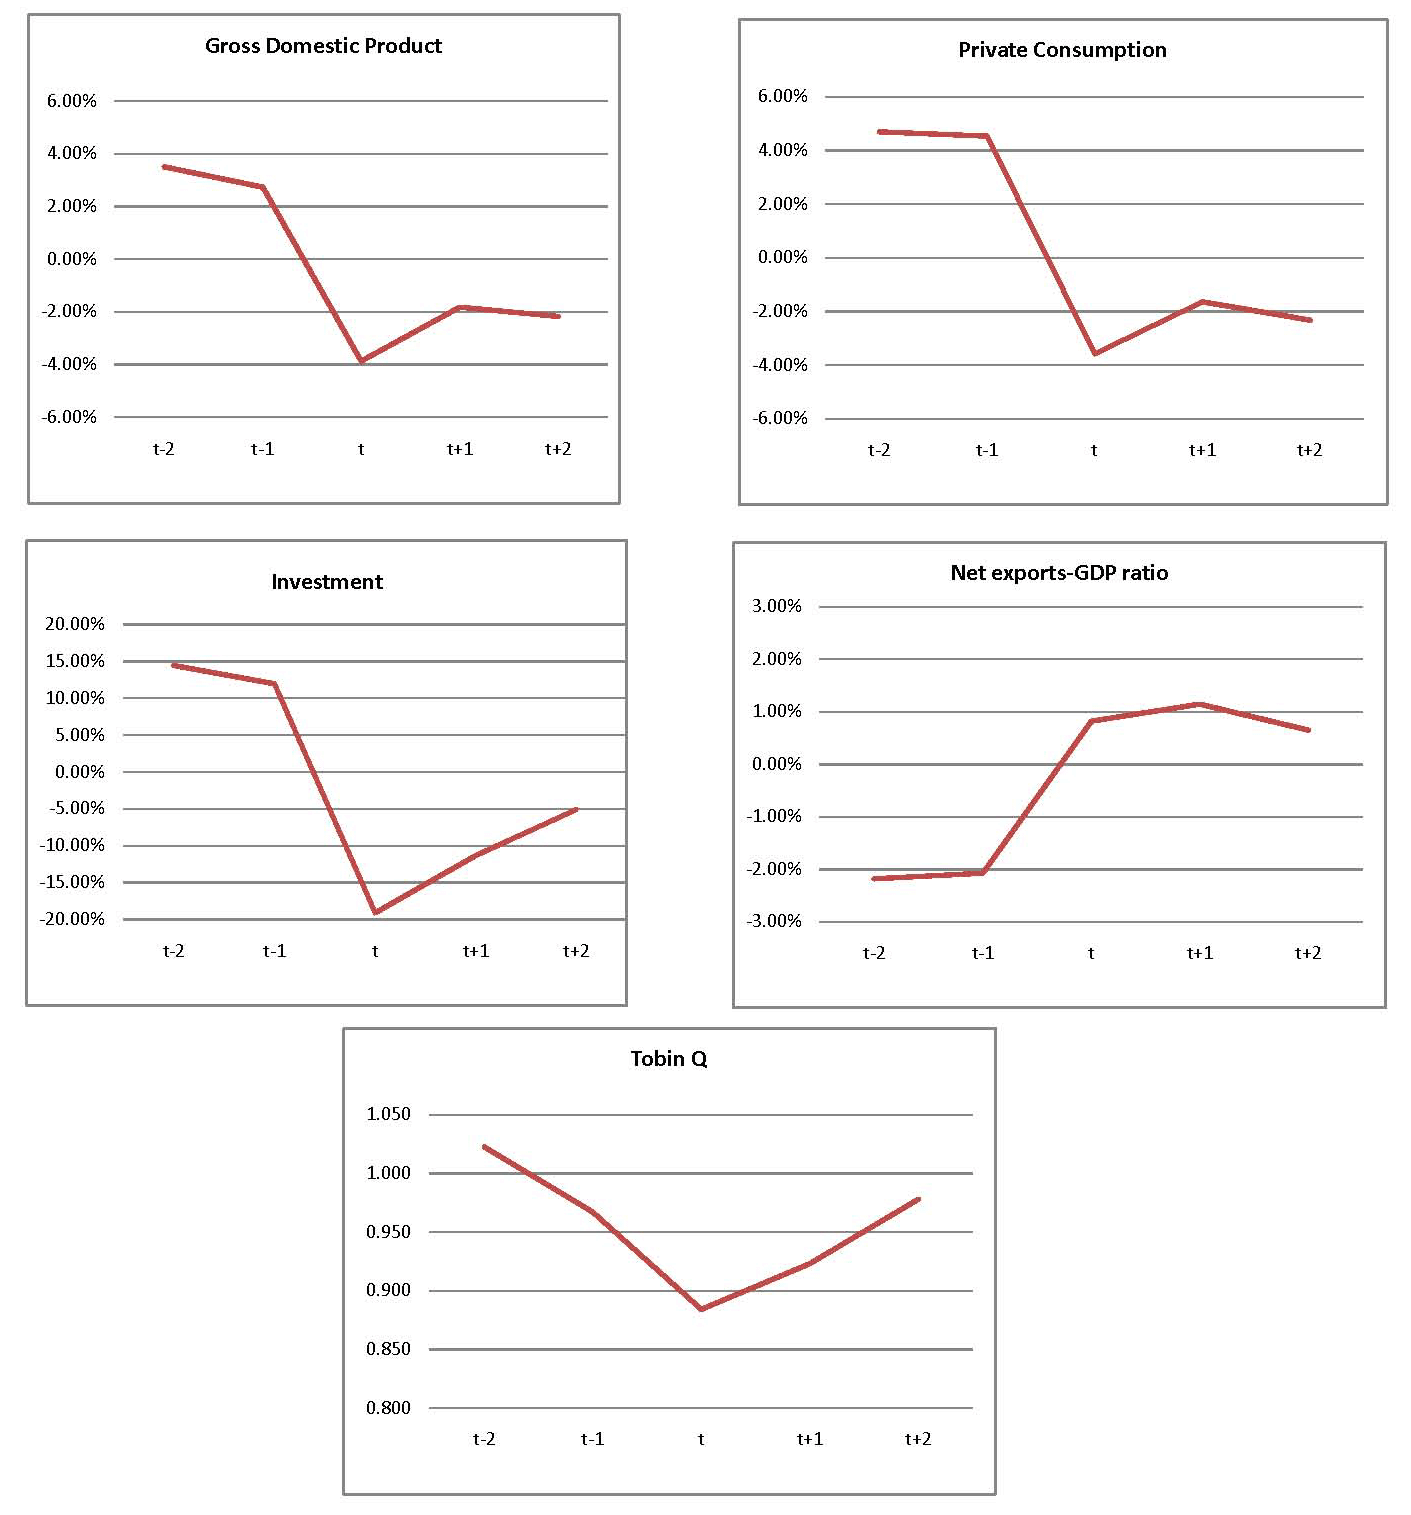 Figure 1 shows five panels that illustrate macroeconomic dynamics around Sudden Stop events in Emerging Economies using five-year event windows based on cross-country medians of HP filtered data. The horizontal axis of each panel shows dates from t-2 to t+2 with date t corresponding to the date of the Sudden Stop events. The vertical axis of each panel shows the percent deviation from trend of the corresponding variable. The upper left panel plots the dynamics of gross domestic product. The upper right panel plots private consumption. The center left panel plots investment. The center right panel plots the next exports-output ratio. The bottom center panel shows Tobins Q.